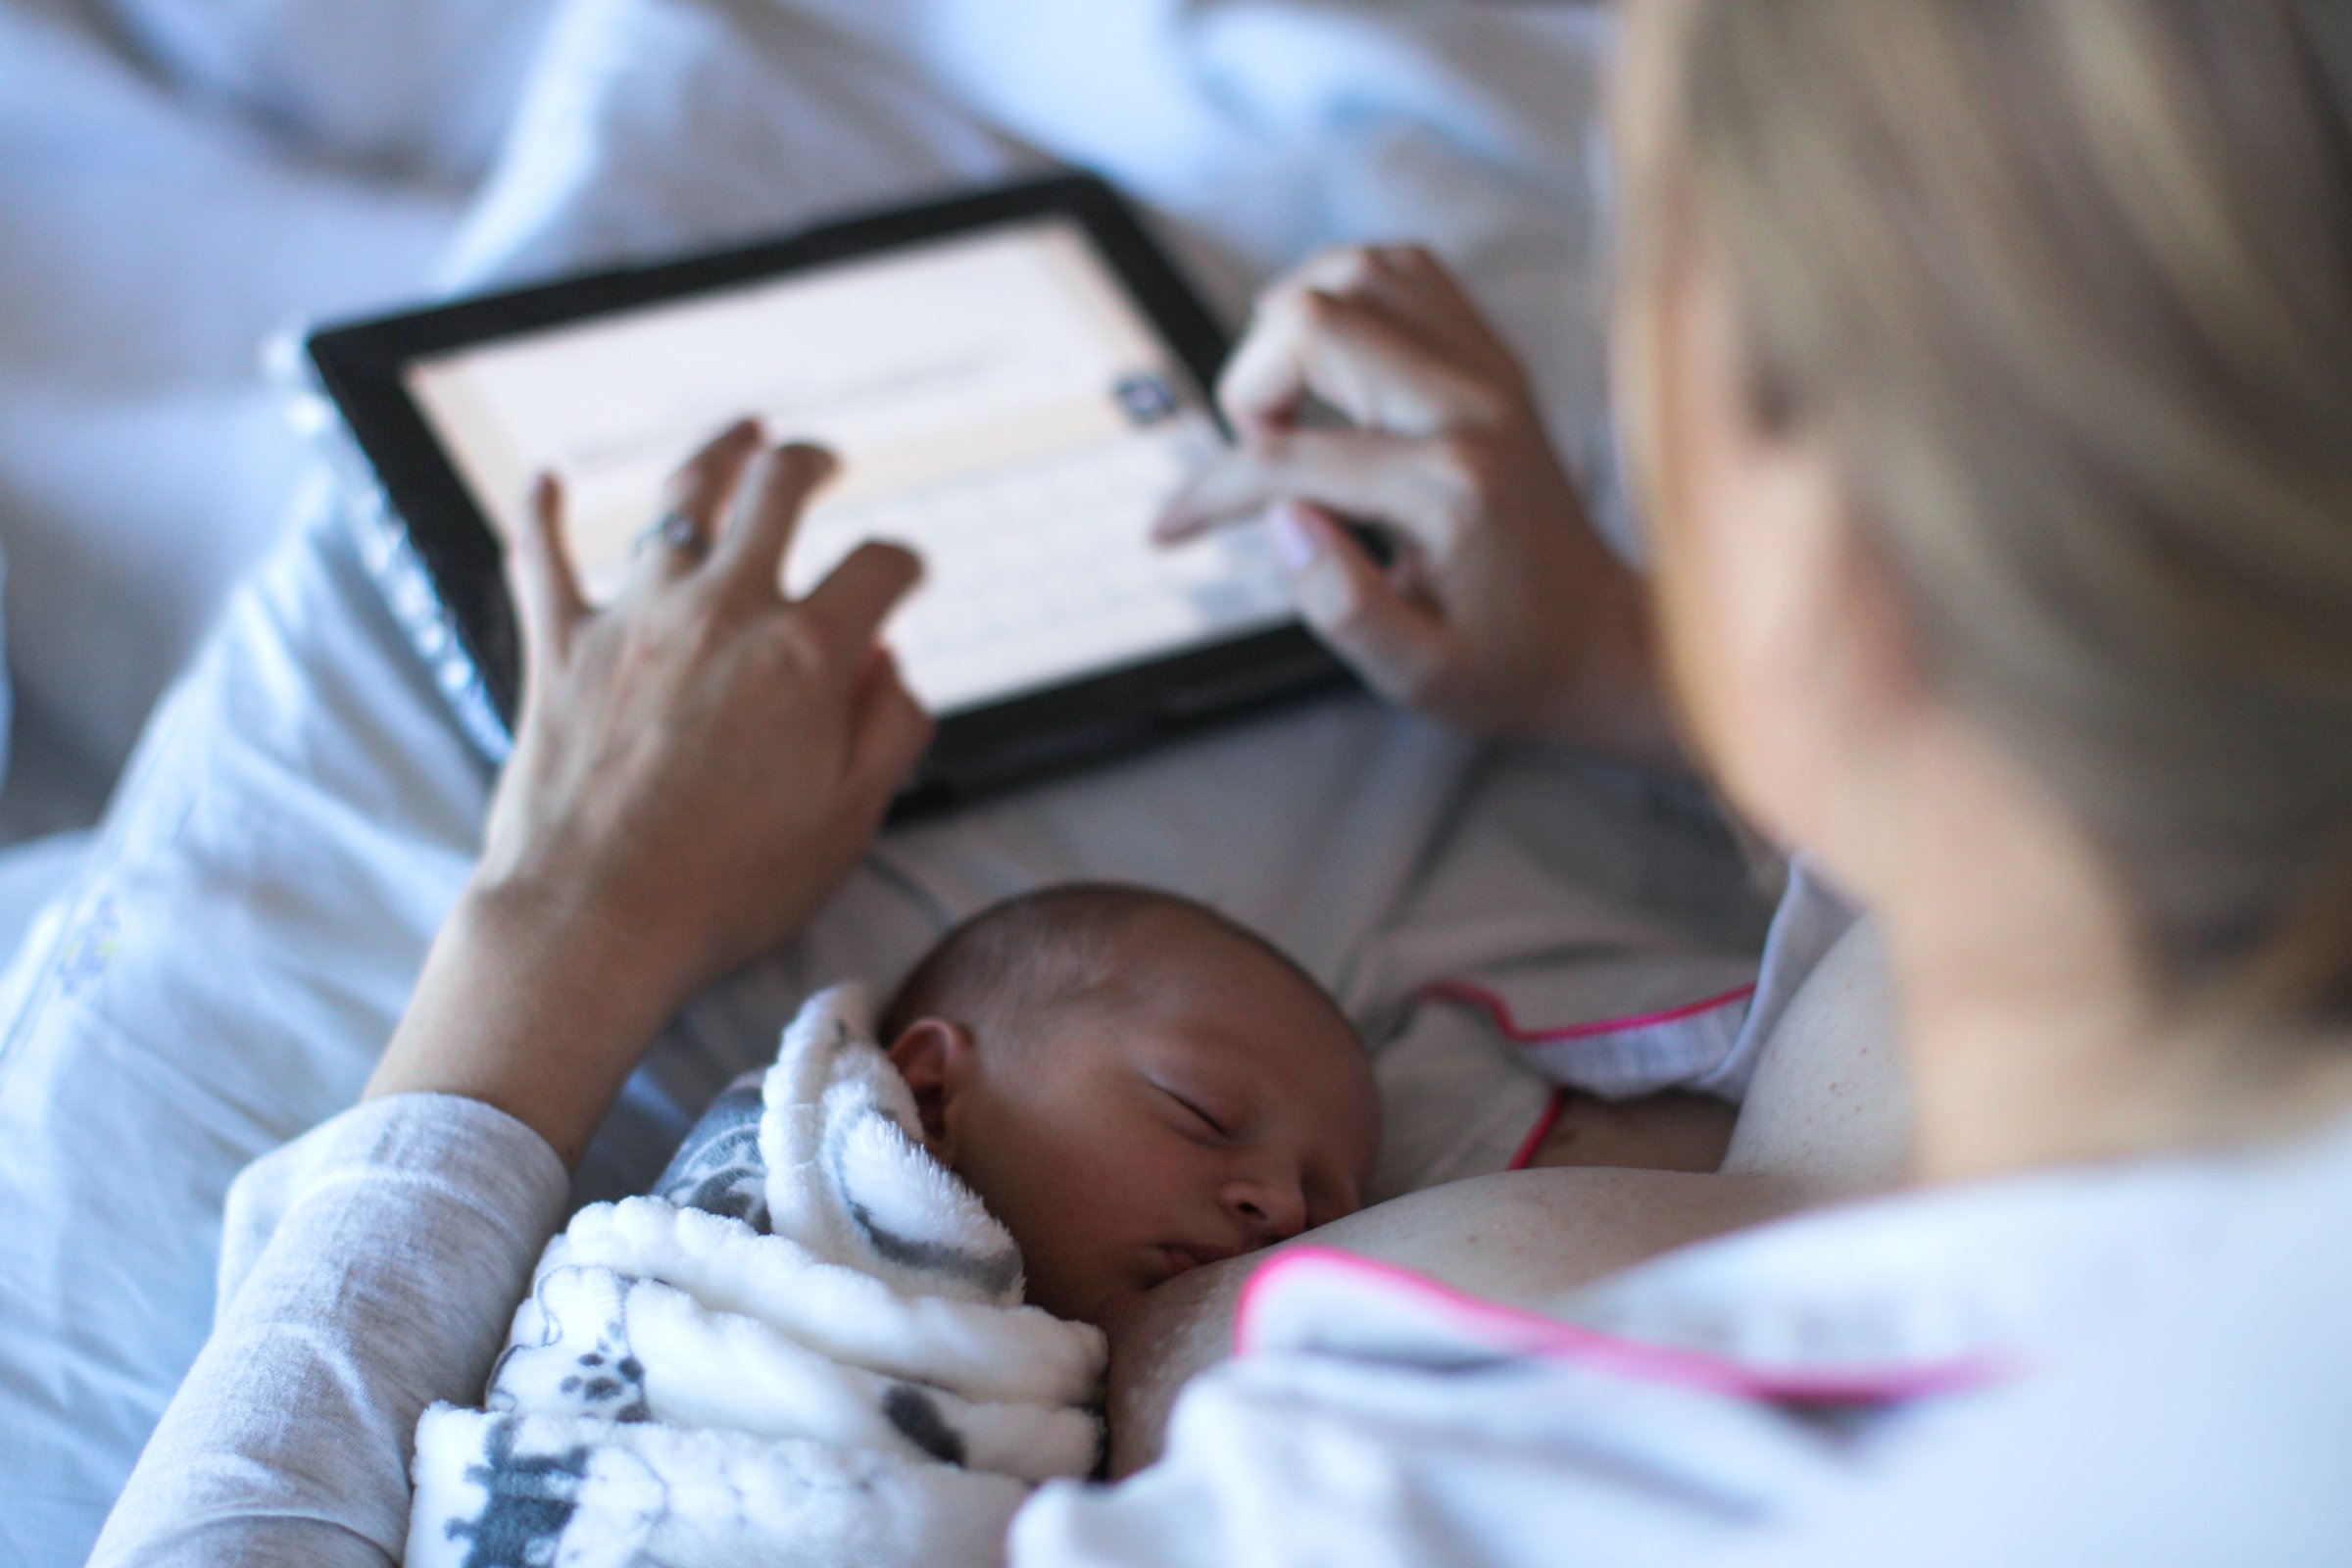 a Young woman fills in a revue of the hospital she gave birth in on a digital tablet while breastfeeding.